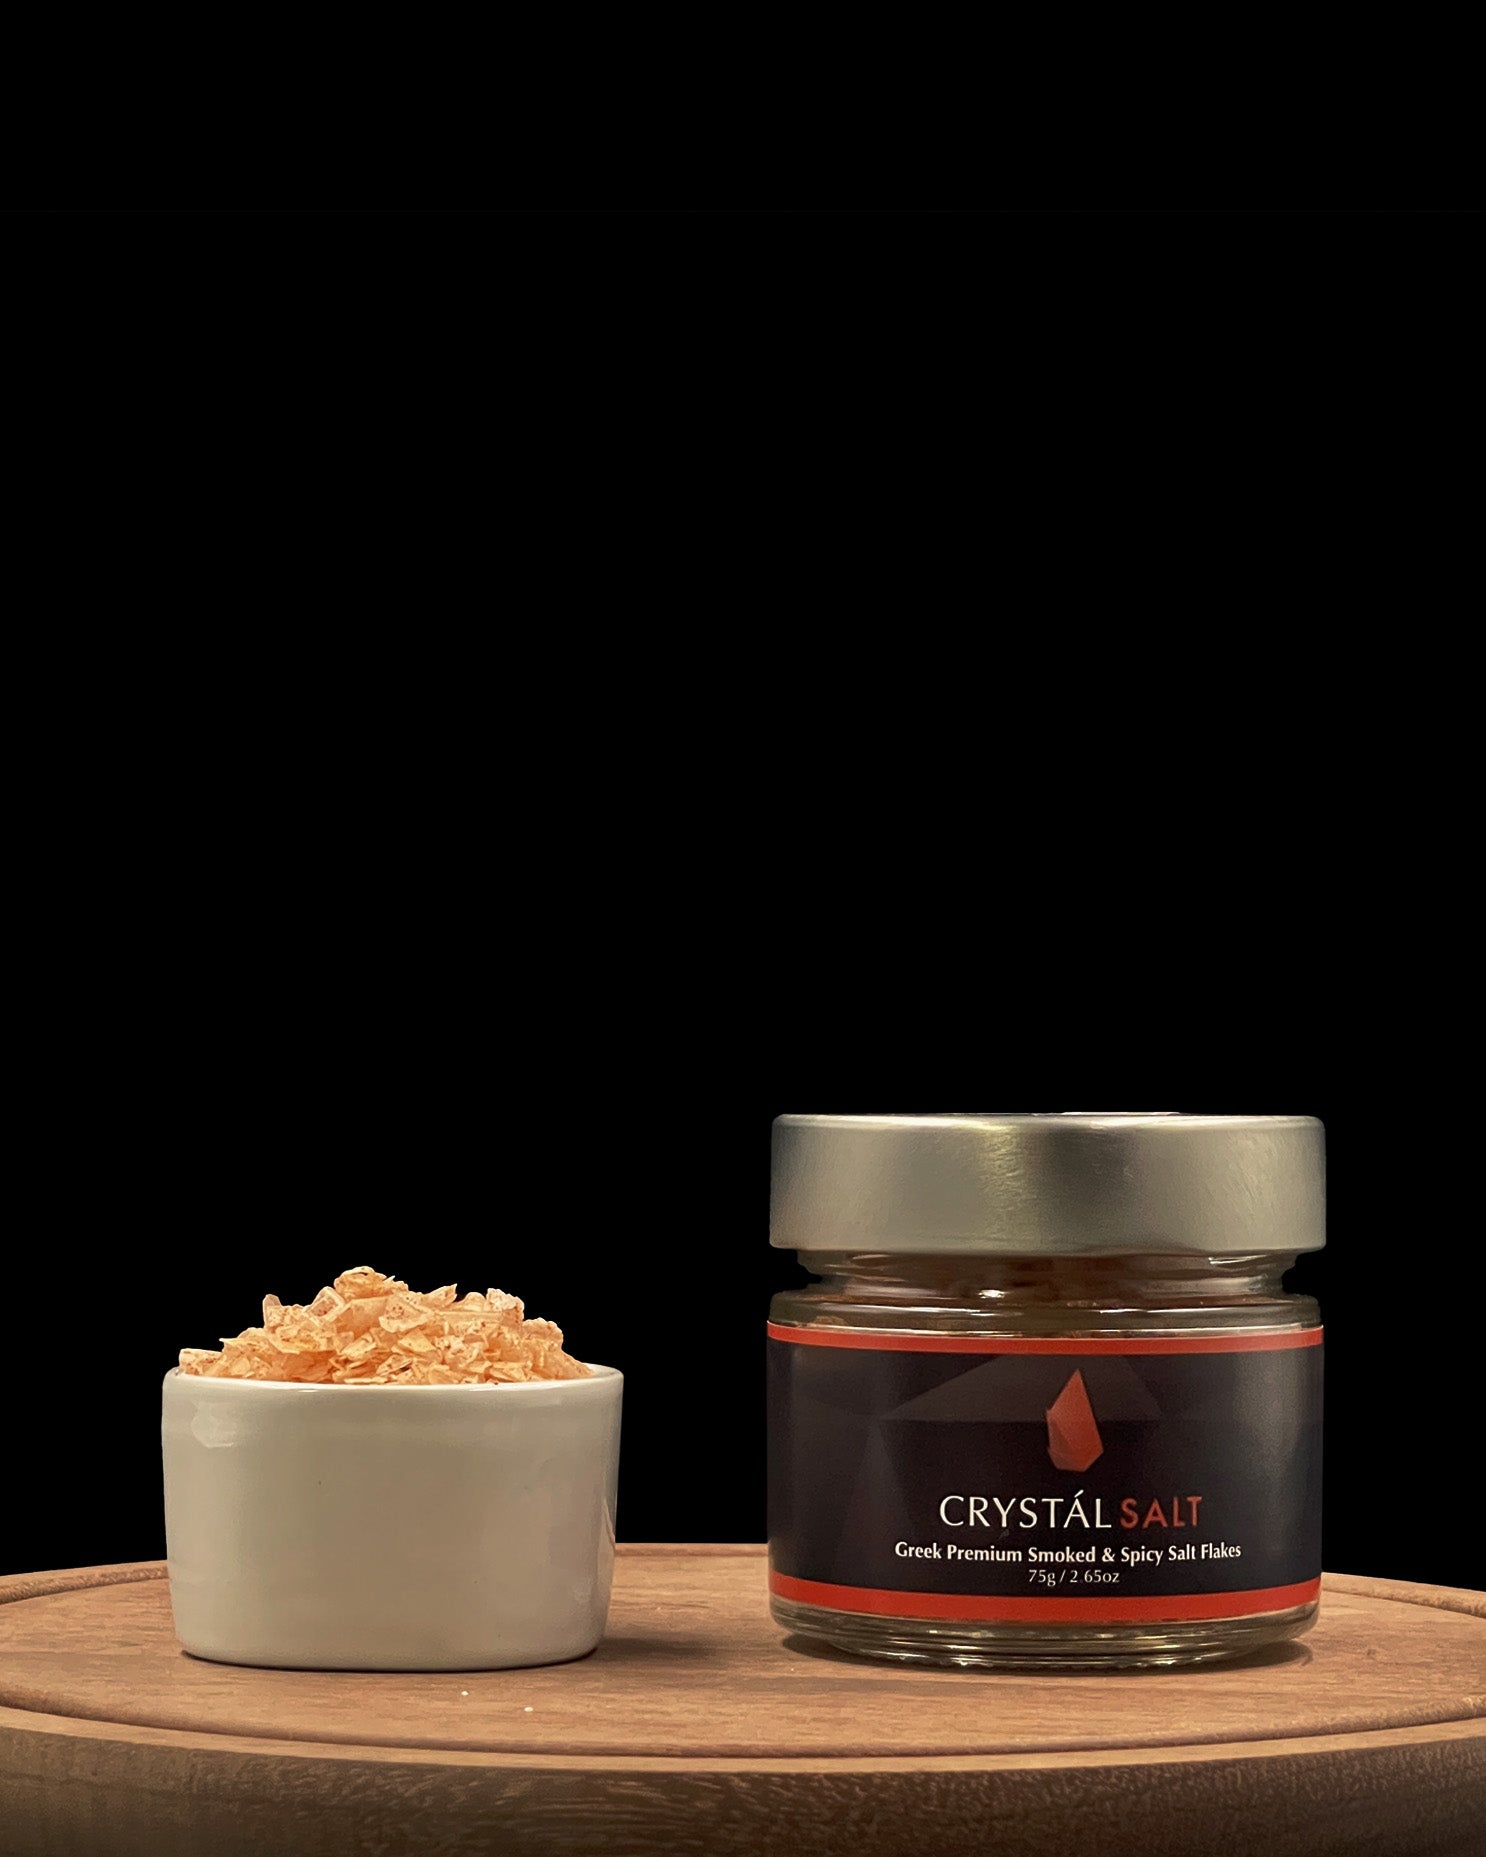 Crystál Salt Flakes - Smoked & Spicy